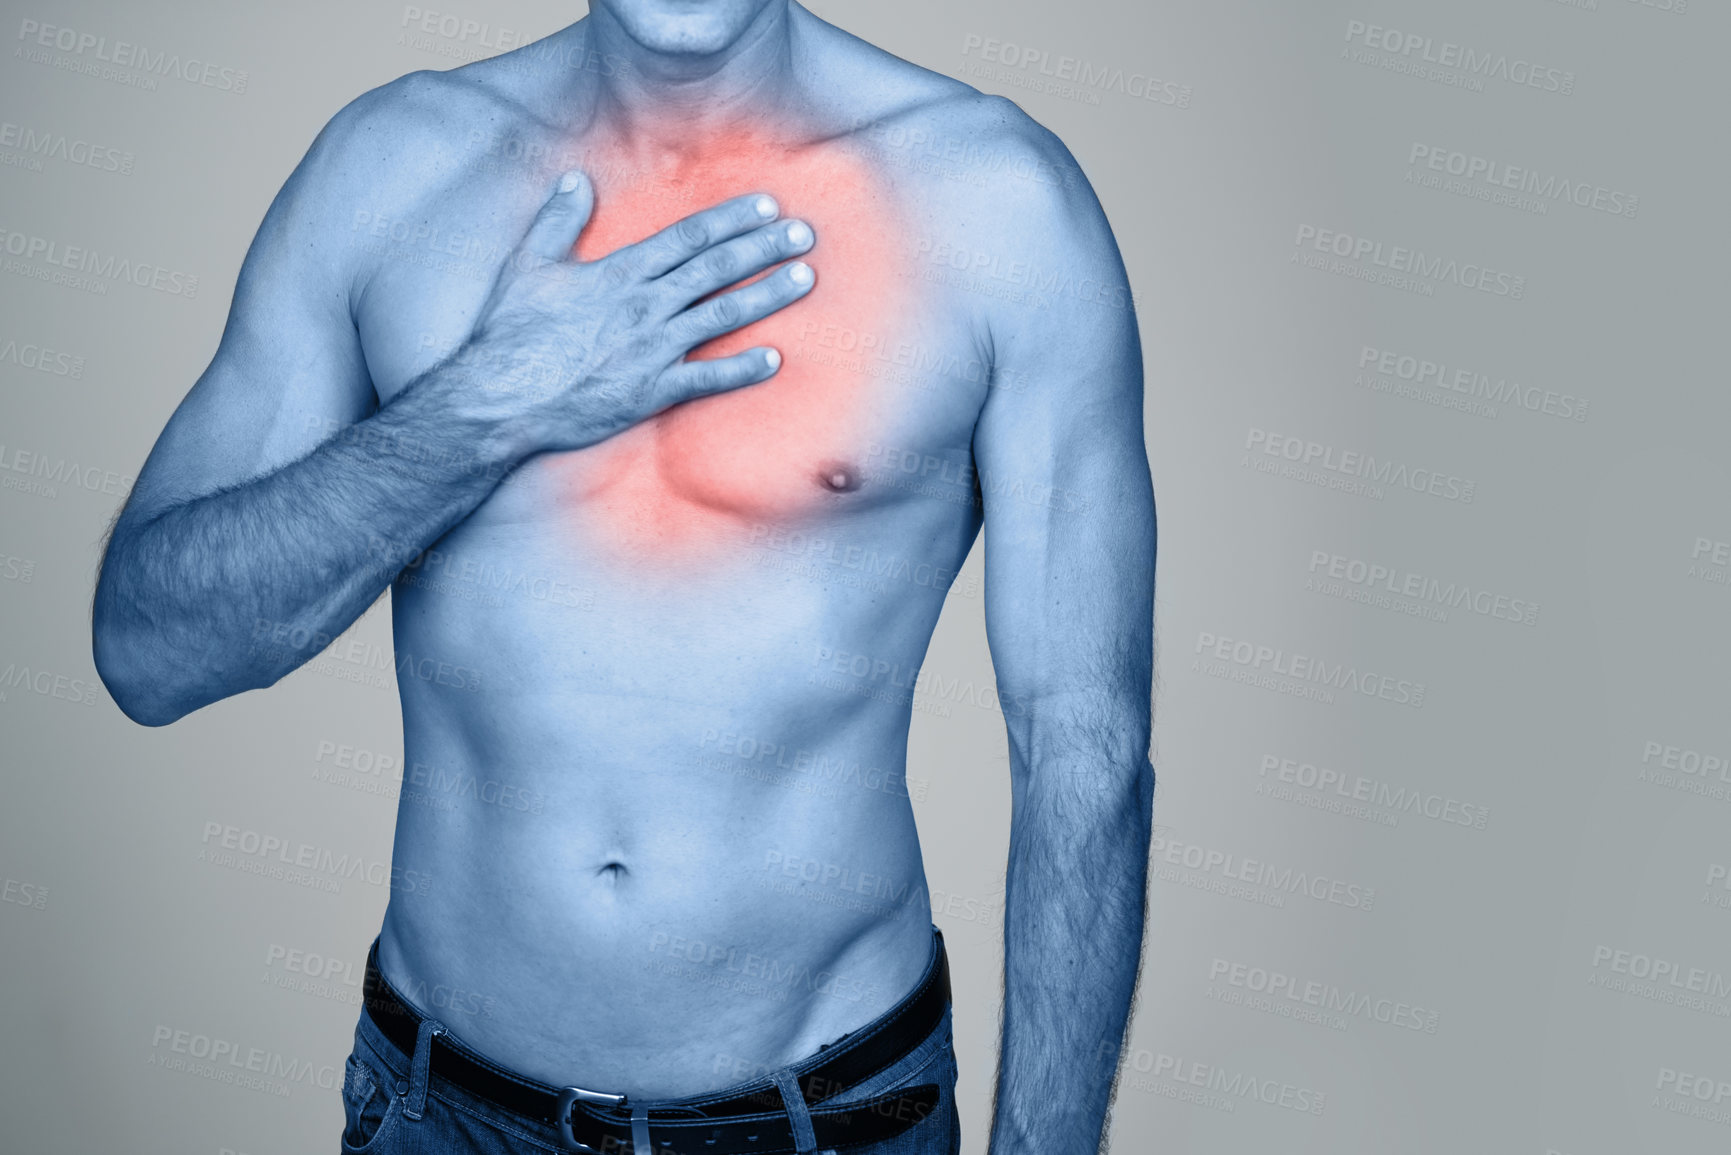 Buy stock photo Medical, chest pain and man with inflammation in studio with heartburn, discomfort or injury. Red glow, shirtless and person with healthcare emergency, ache or strain by gray background with mockup.